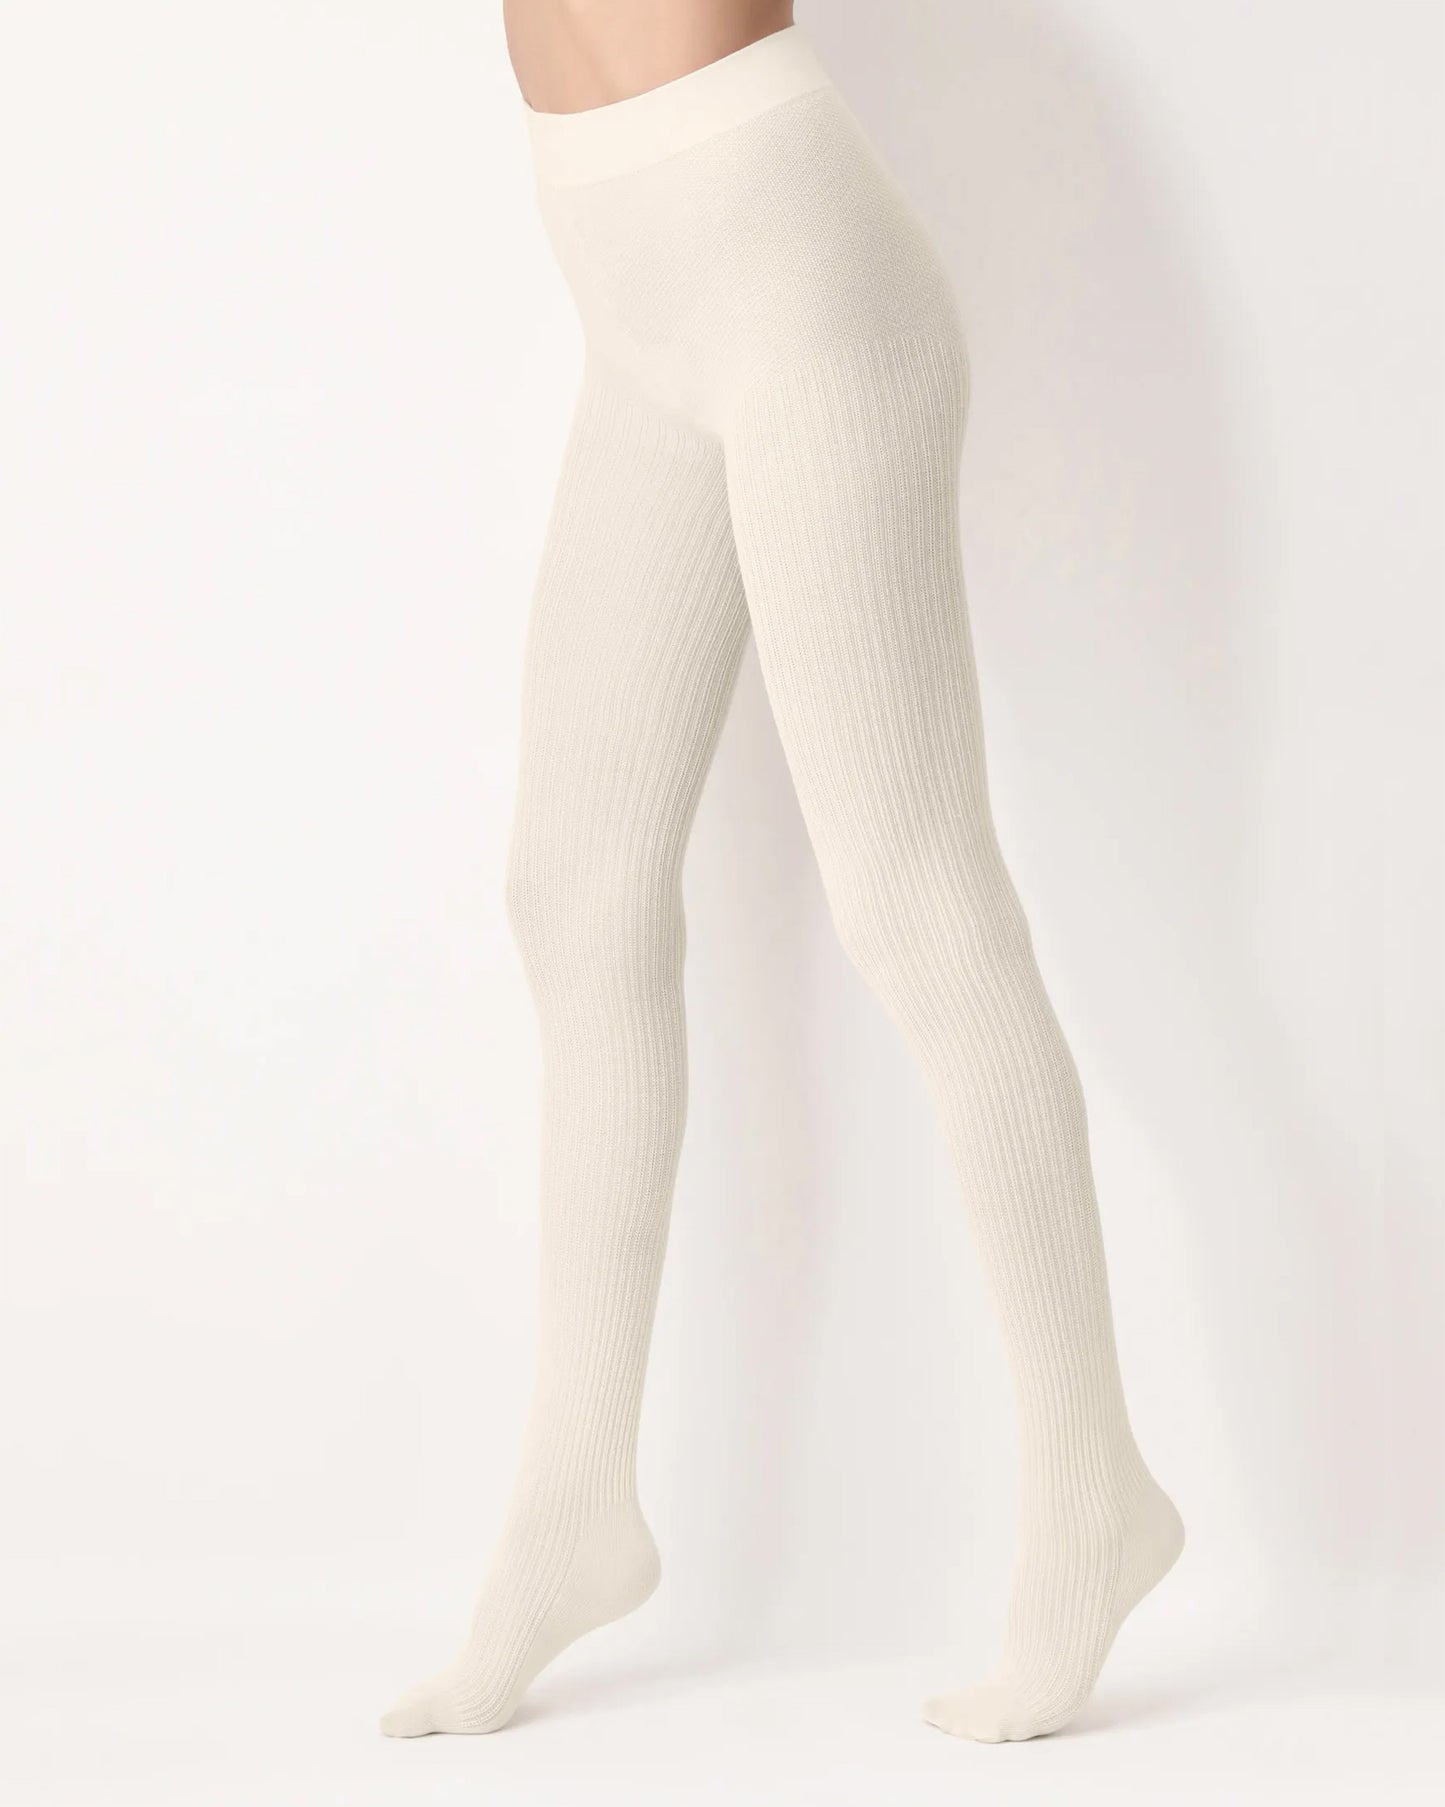 Oroblu Eco Natural Rib Collant - Ivory cream ribbed knitted tights made of soft recycled polyester and viscose with built in shoe liner socks.